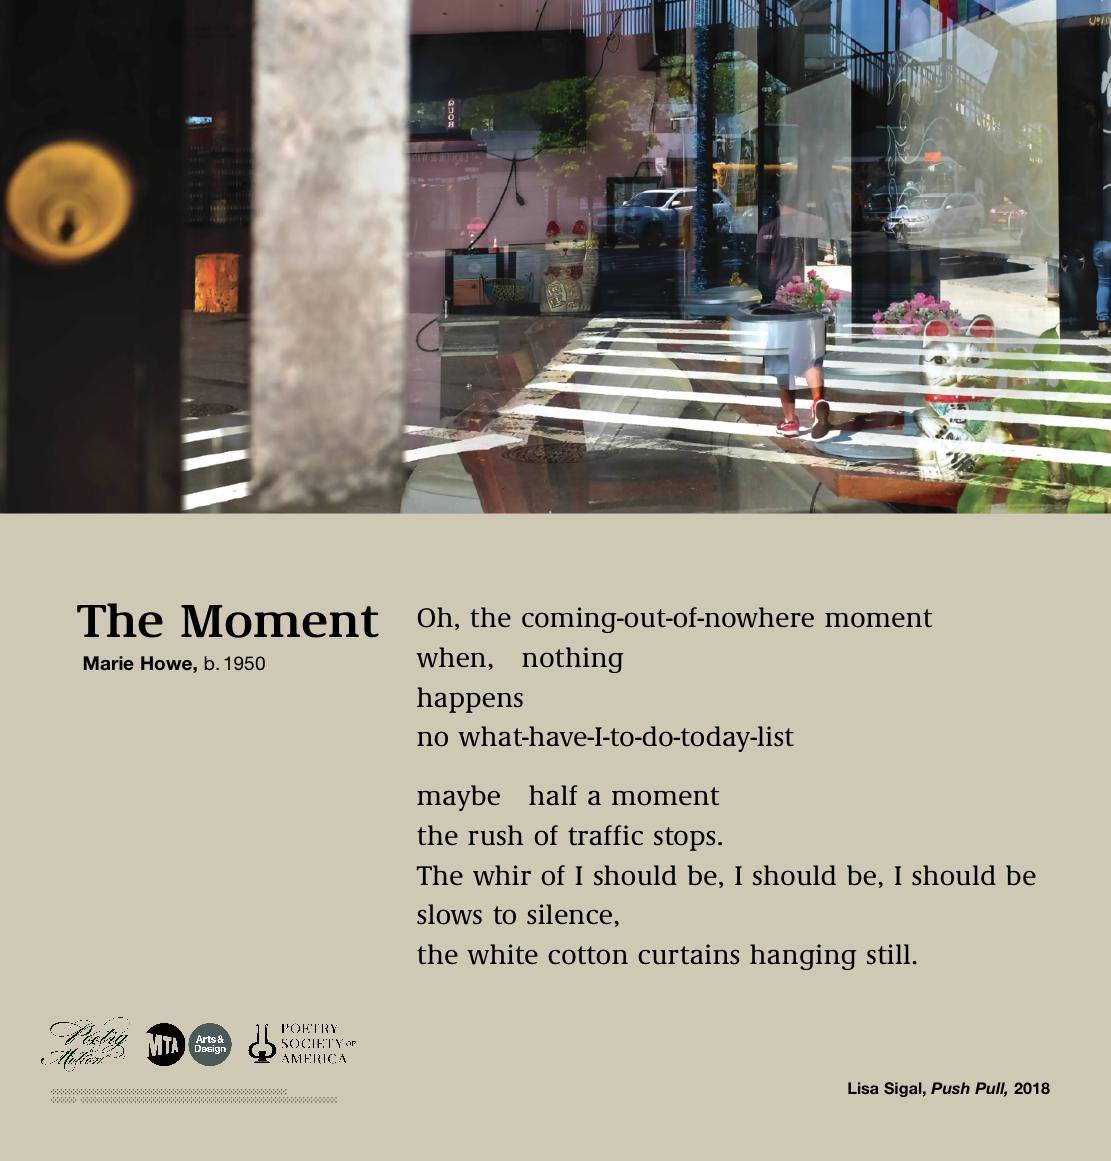 A poster featuring art by Lisa Sigal depicts a Brooklyn streetscape reflected in a storefront window with two maneki-neko facing out. Below the photo is a poem titled The Moment, written by Marie Howe.